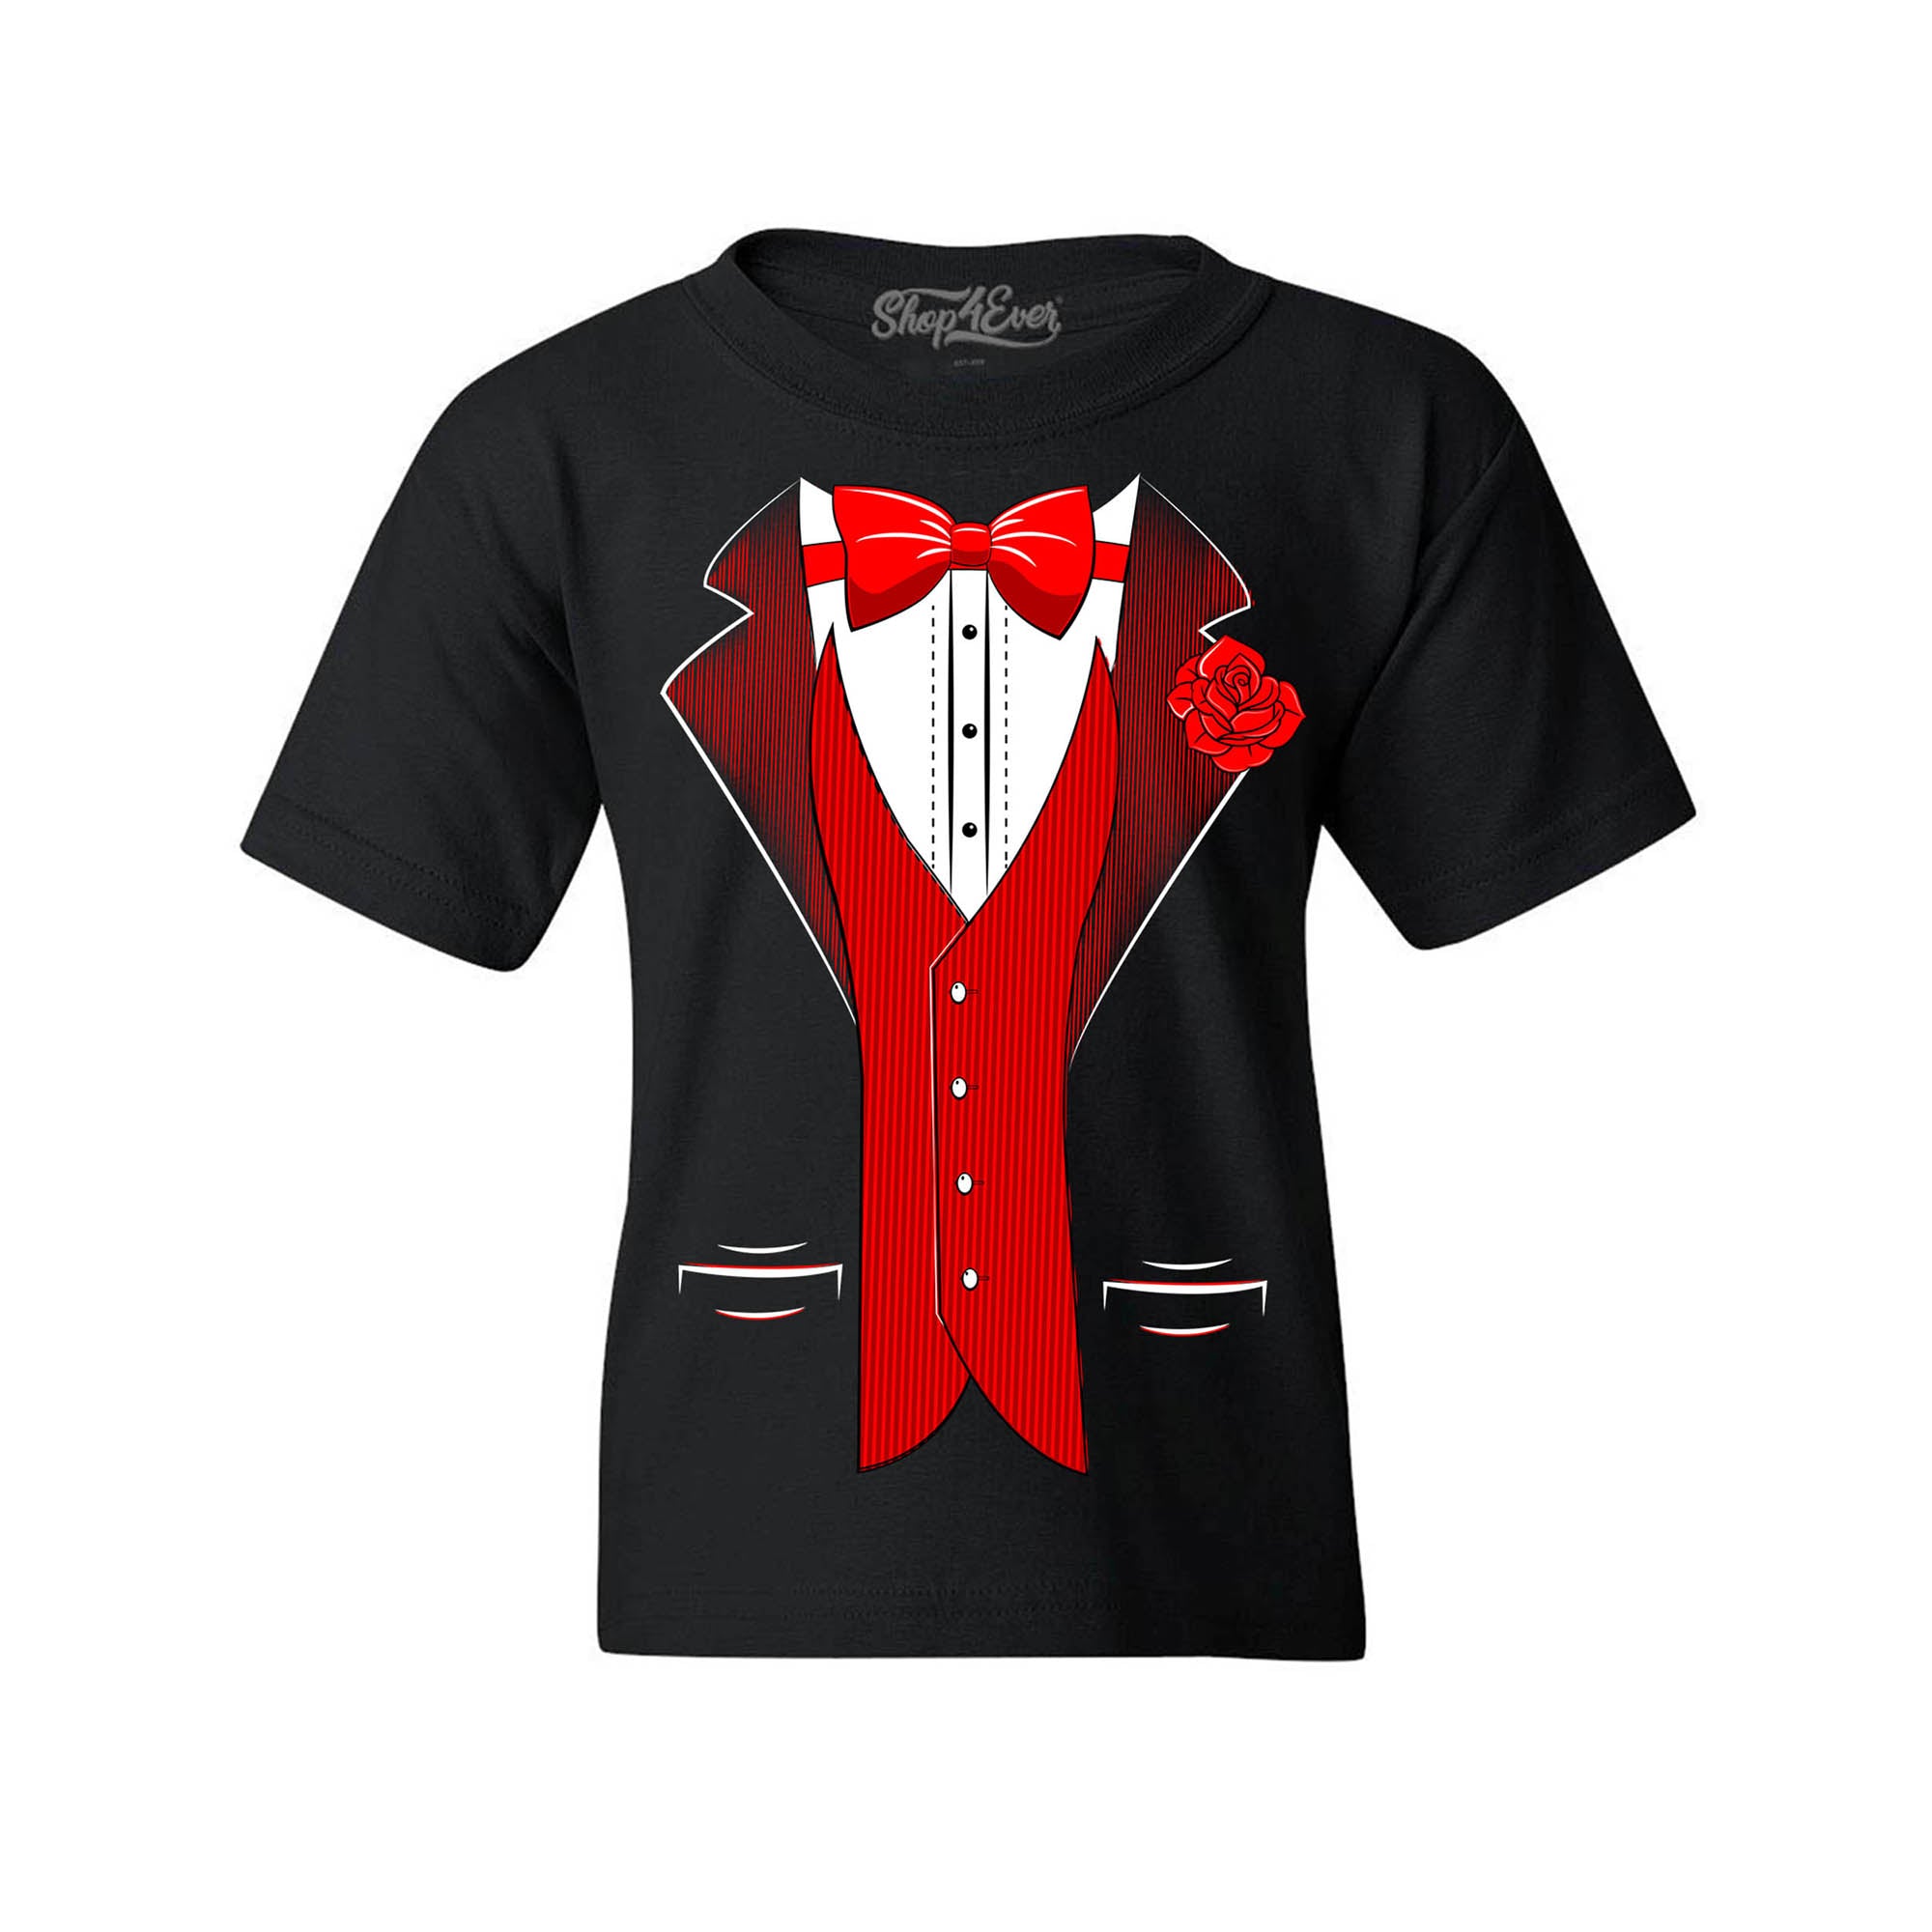 Classic Tuxedo with Red Rose Youth's T-Shirt Party Costume Shirts